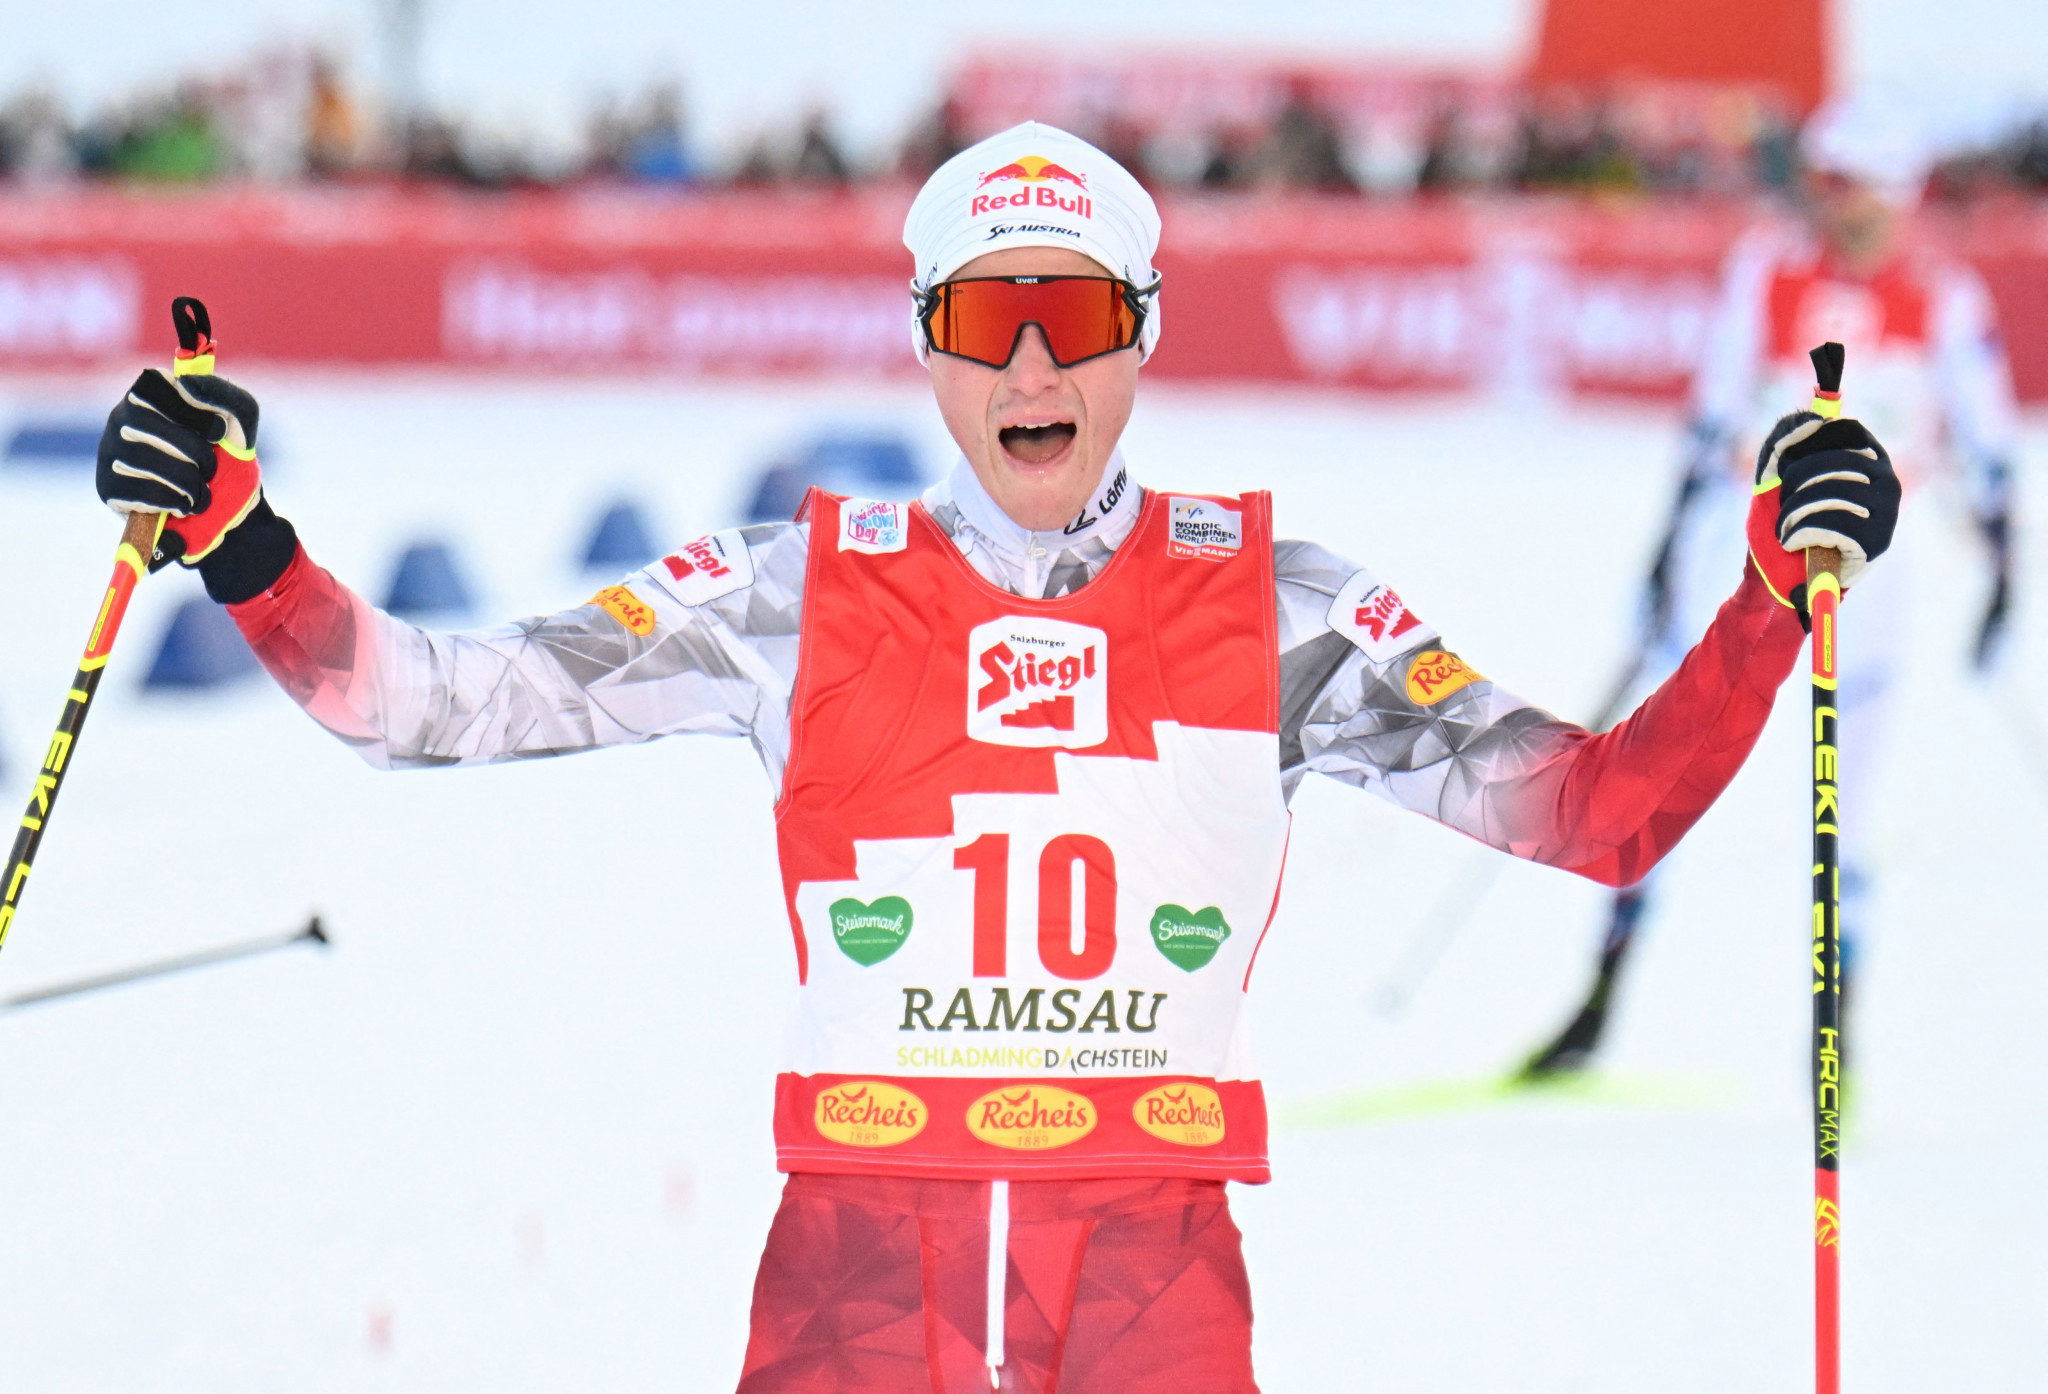 Lamparter dominant in Nordic Combined World Cup in Otepää